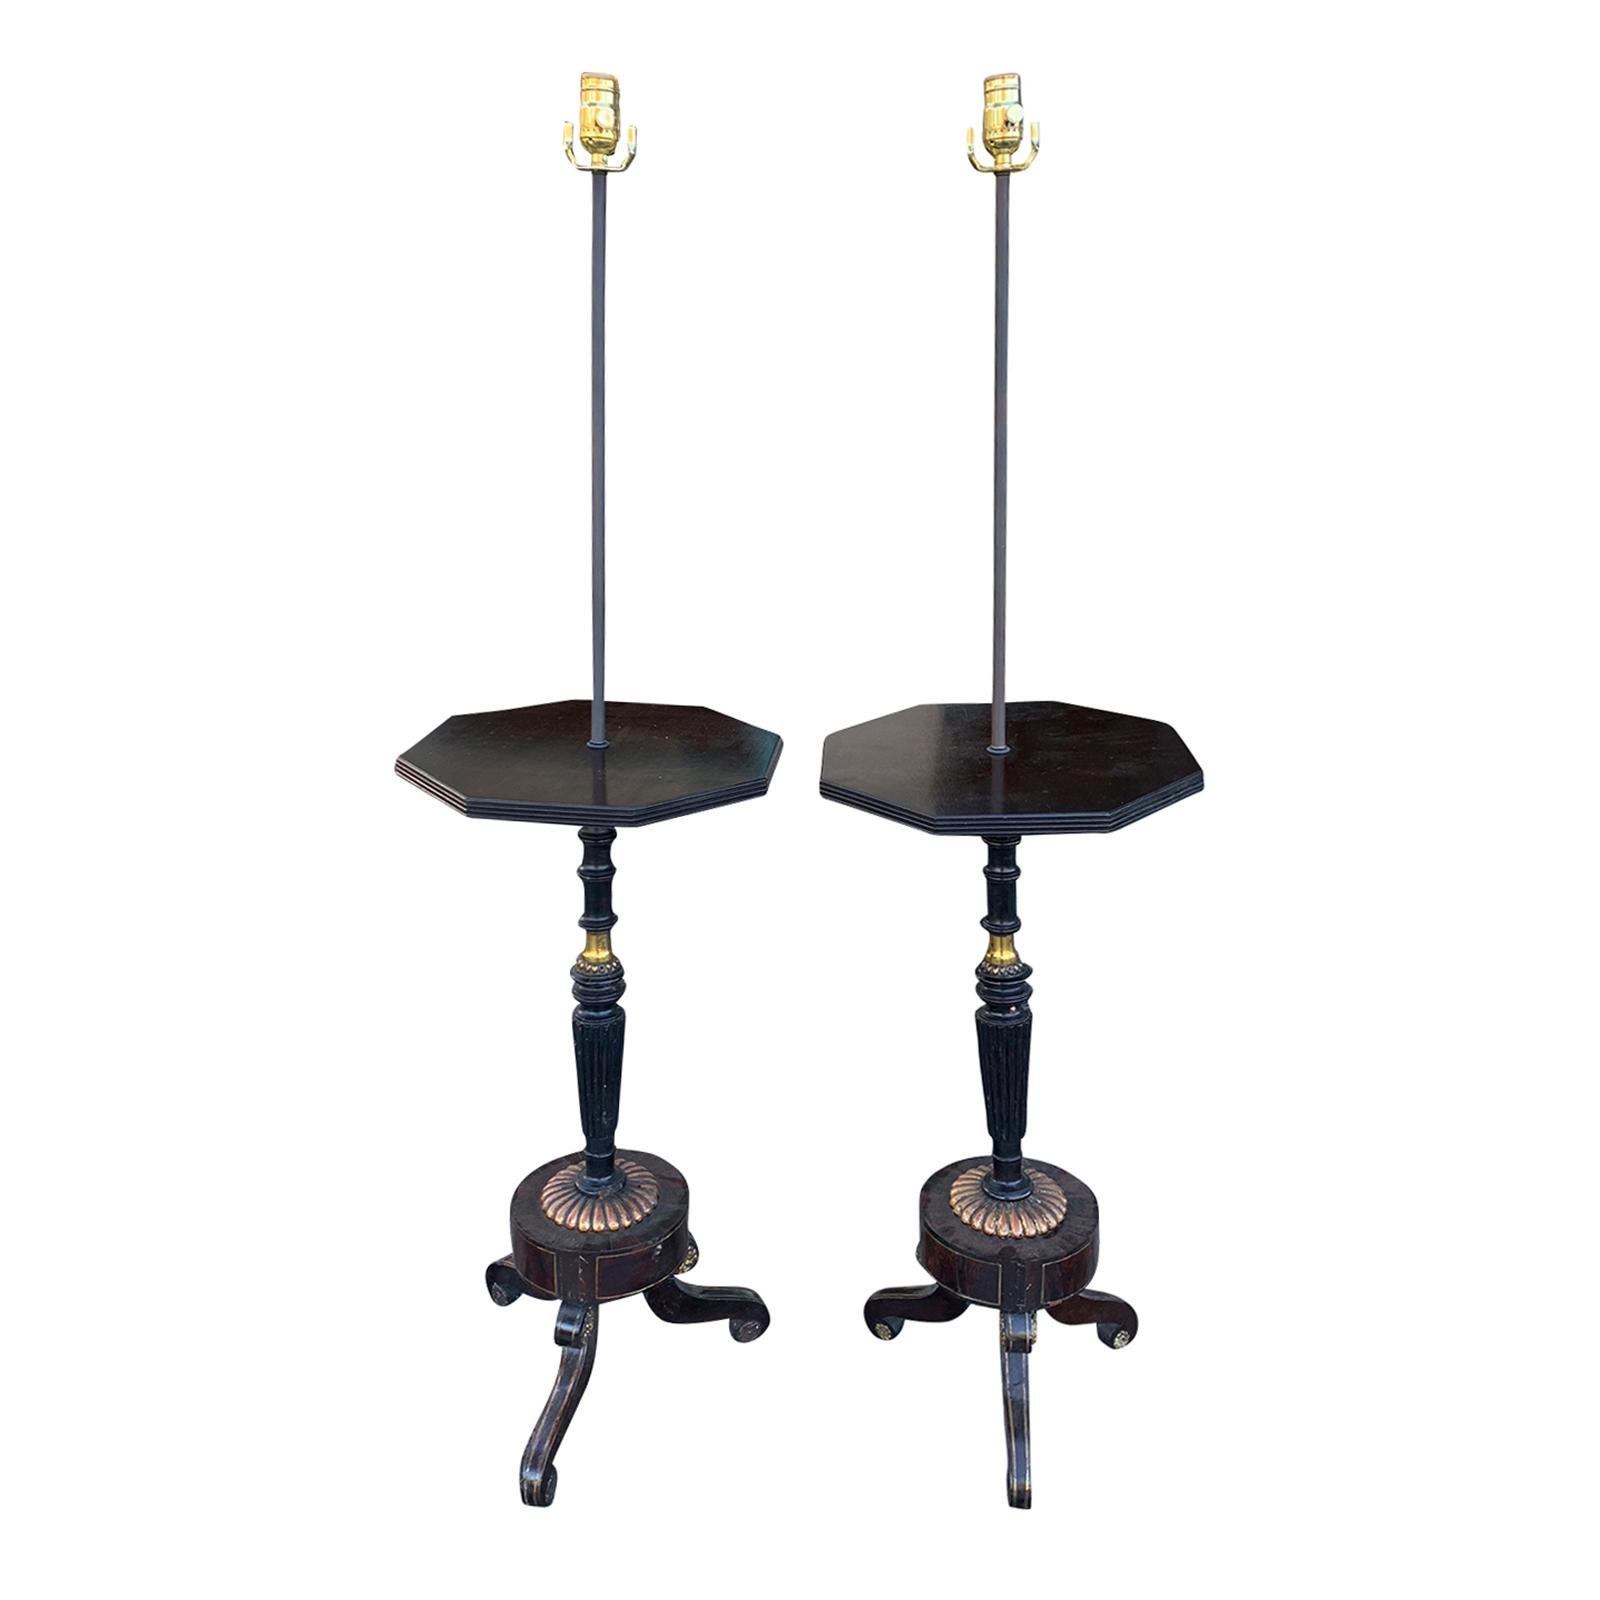 Pair of Regency Style Tables with Period Elements as Floor Lamps